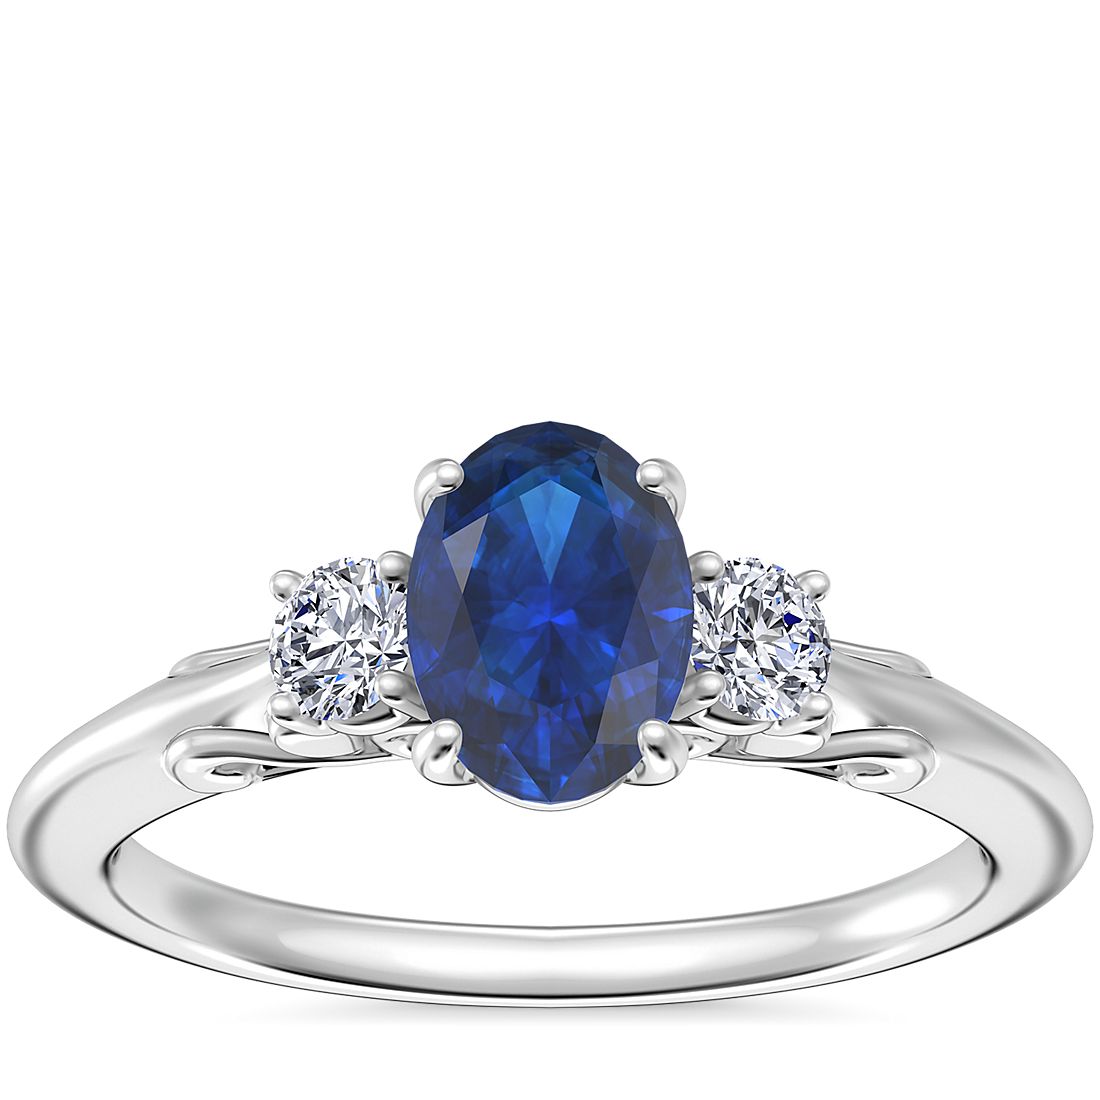 Vintage Three Stone Engagement Ring with Oval Sapphire in Platinum (7x5mm)